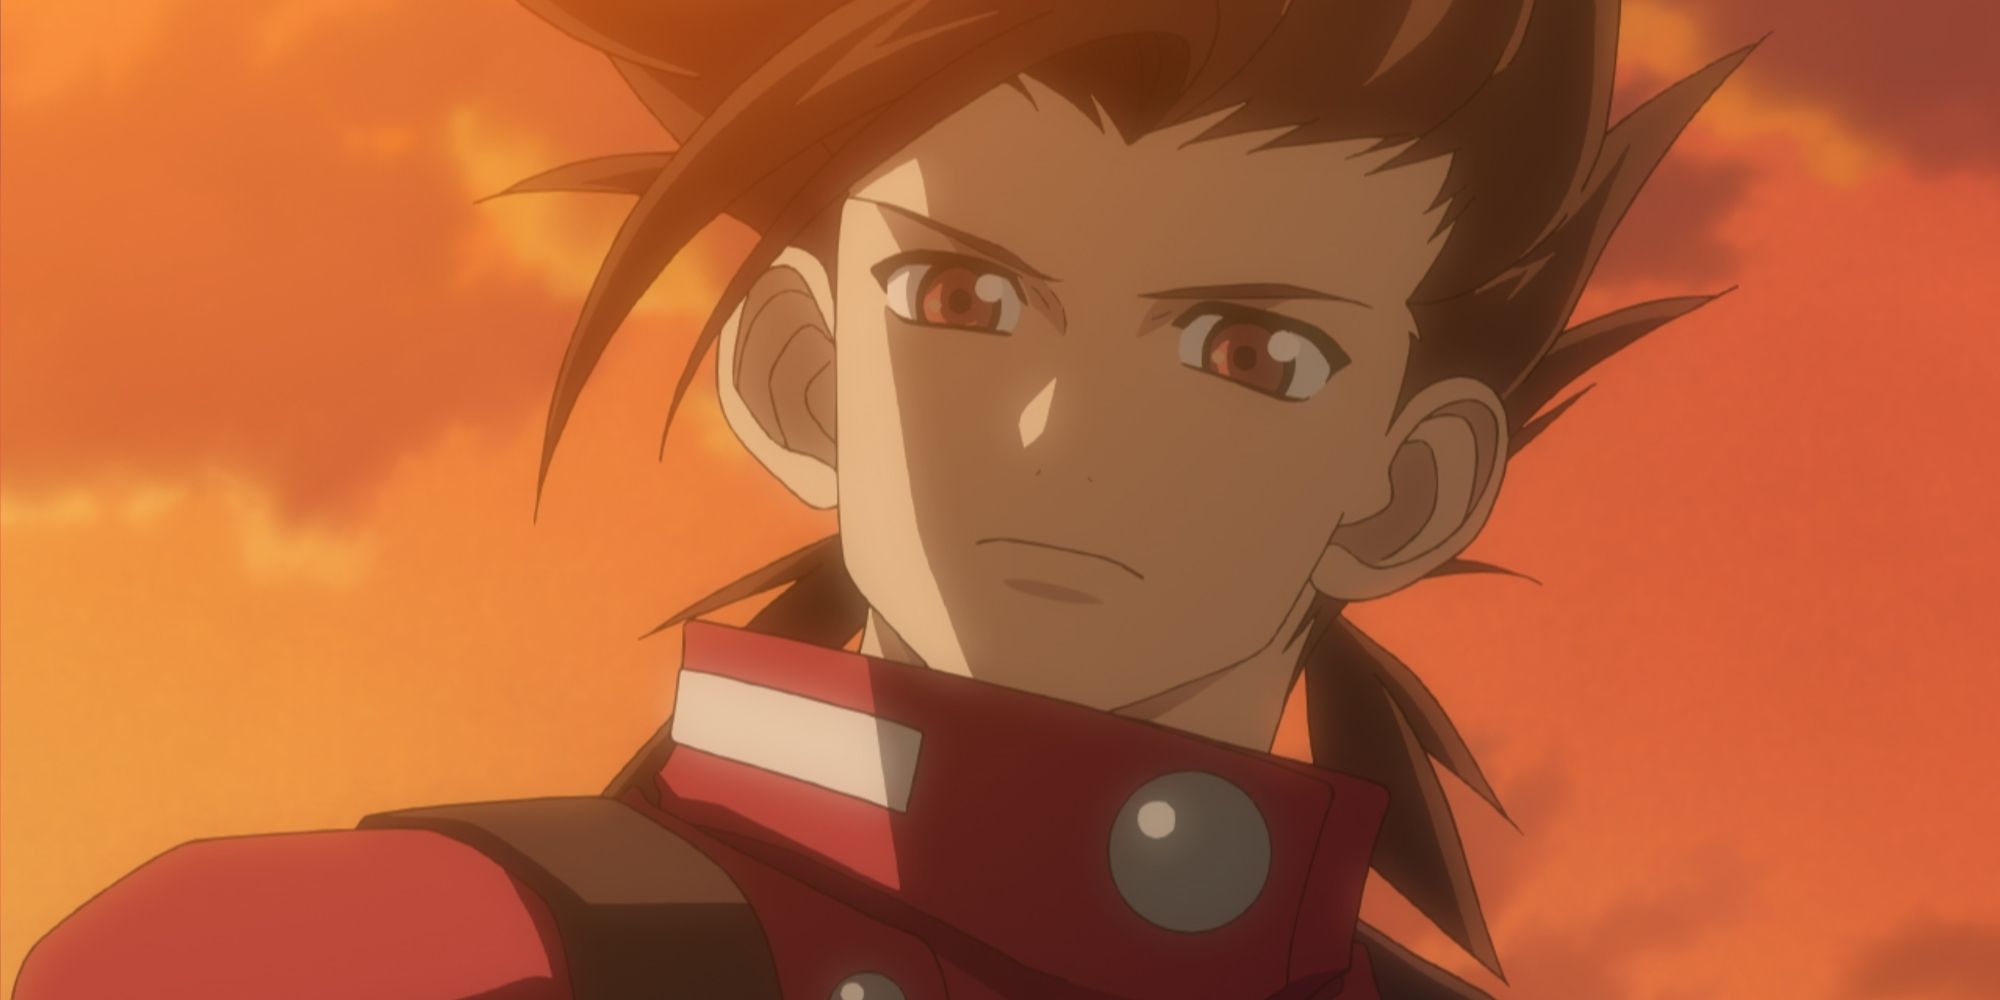 An image of Lloyd from Tales of Symphonia in front of an orange sky, with a sad expression on his face.